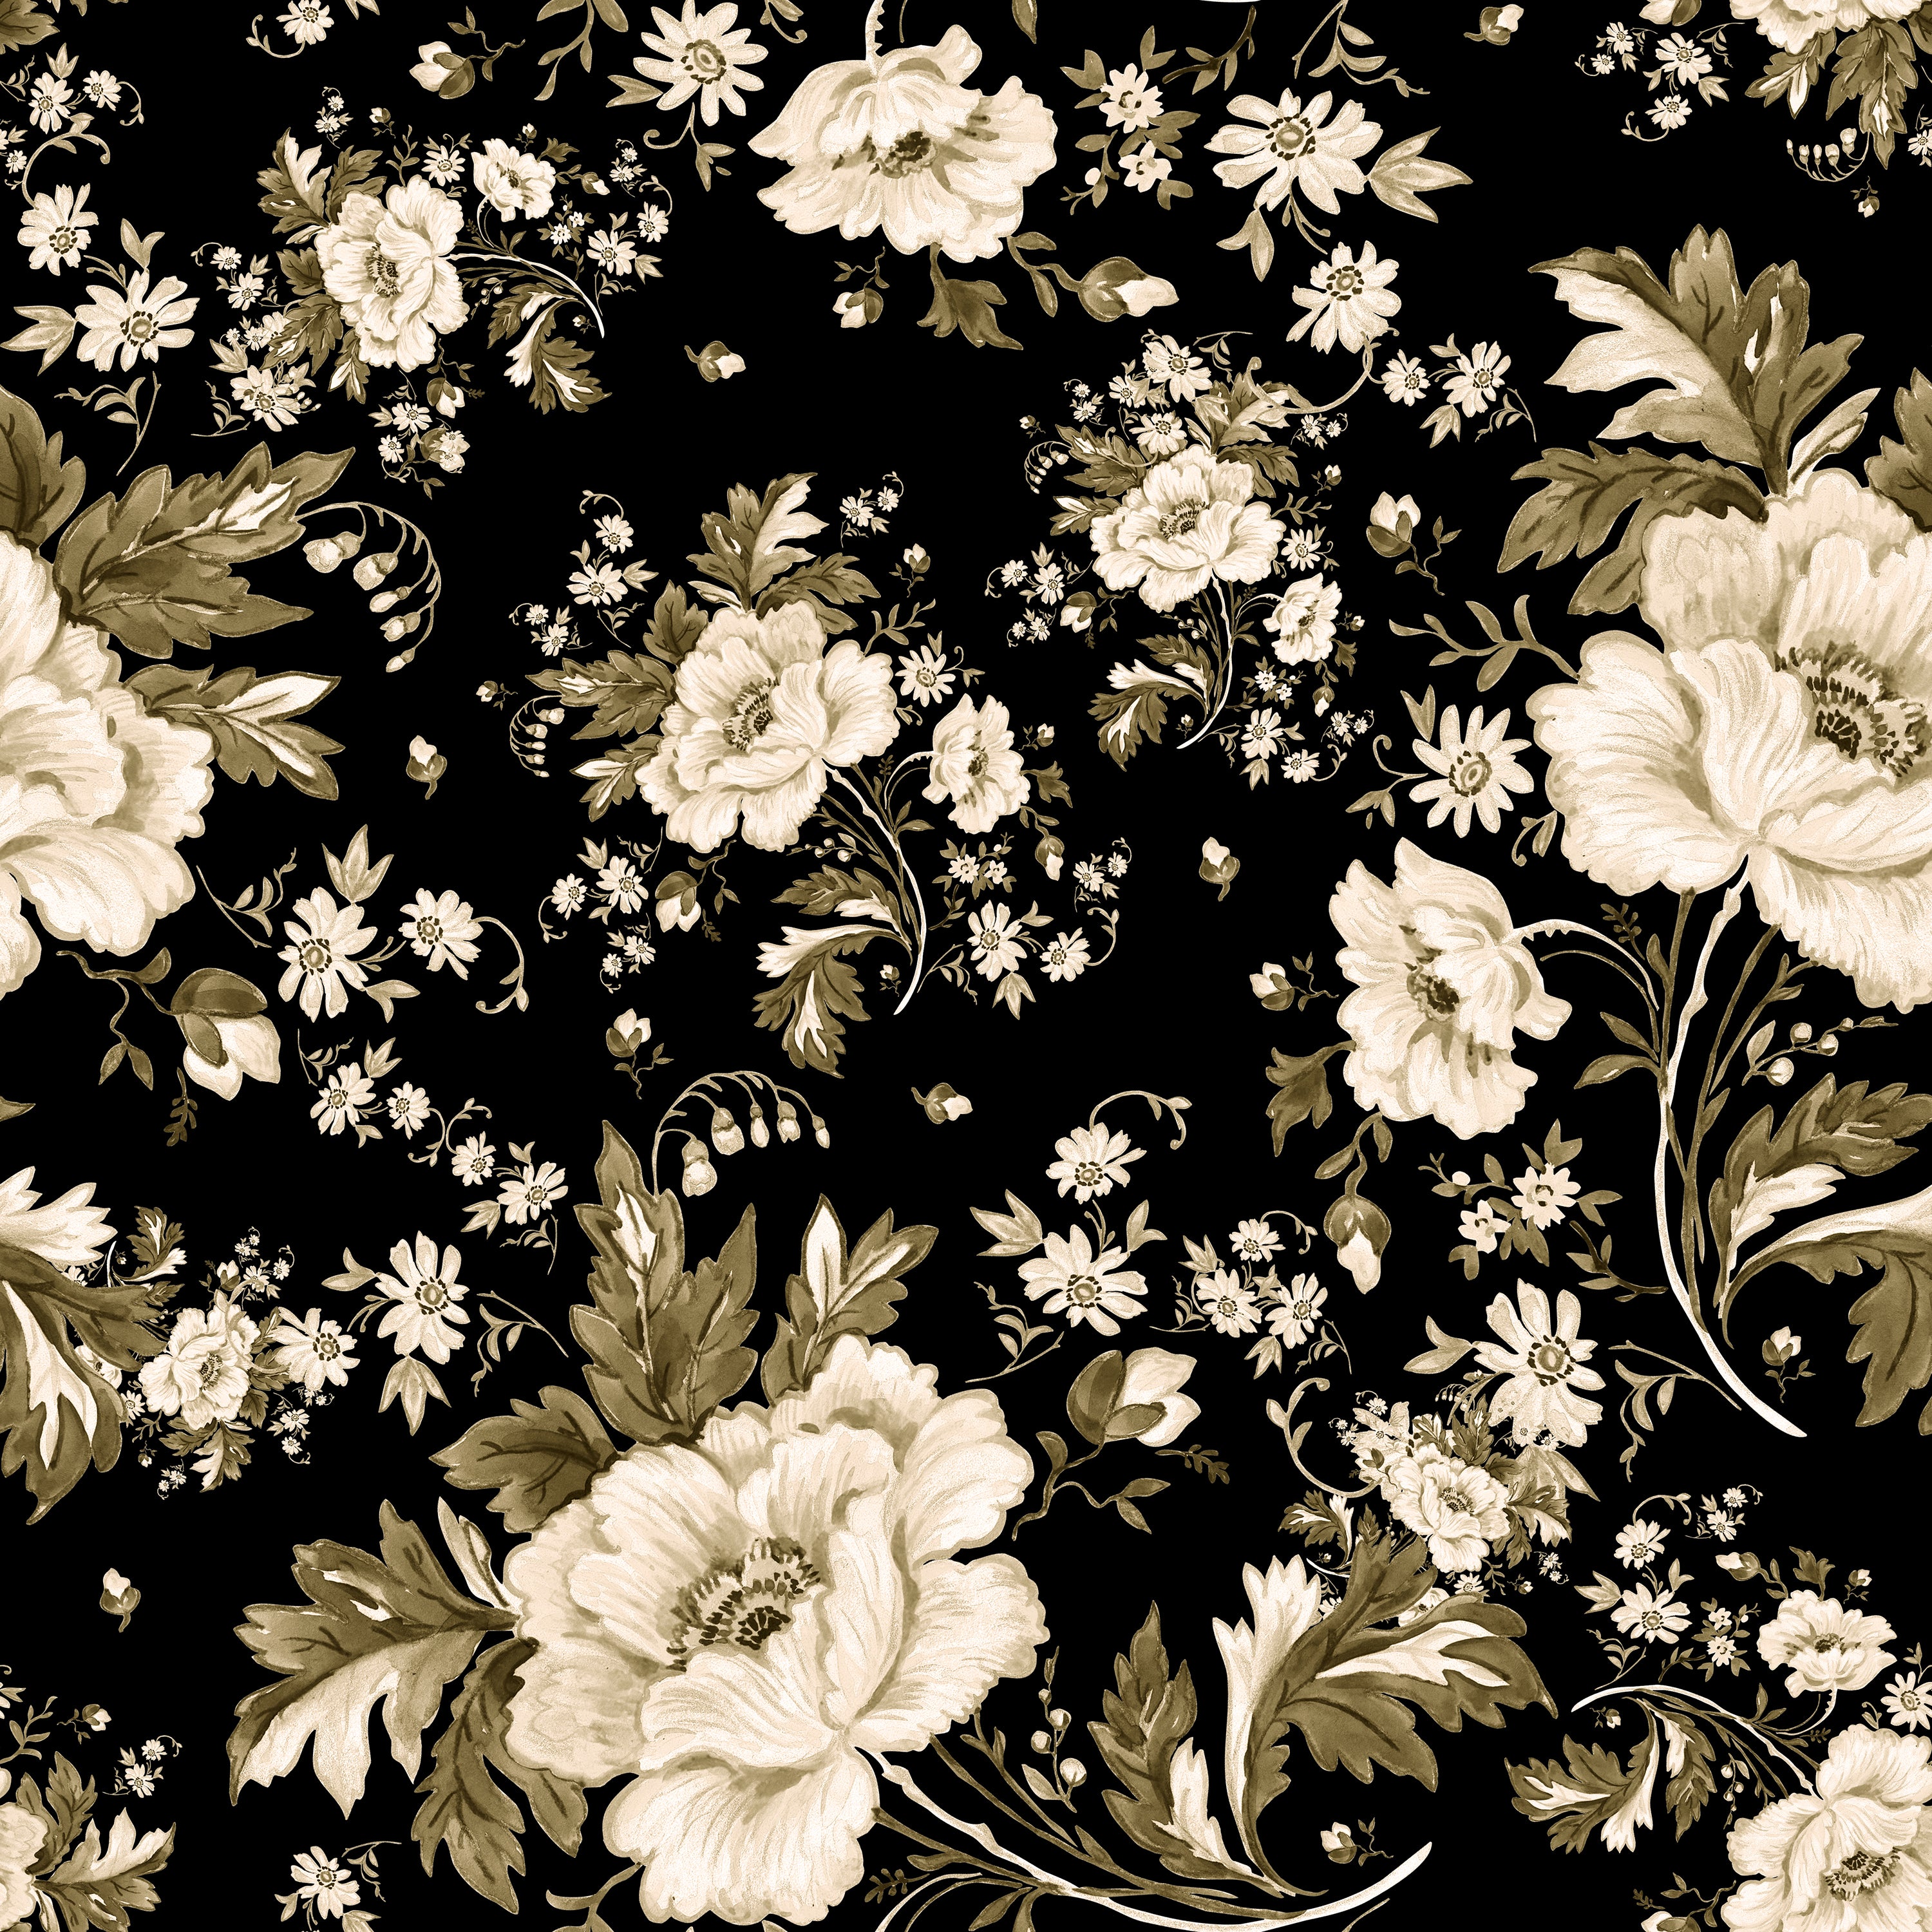 A close-up view of the Midnight Garden Wallpaper showing its intricate design of white and pale flowers on a deep black background. This detailed floral pattern evokes a feeling of a lush, nocturnal garden, adding a touch of elegance and mystery.